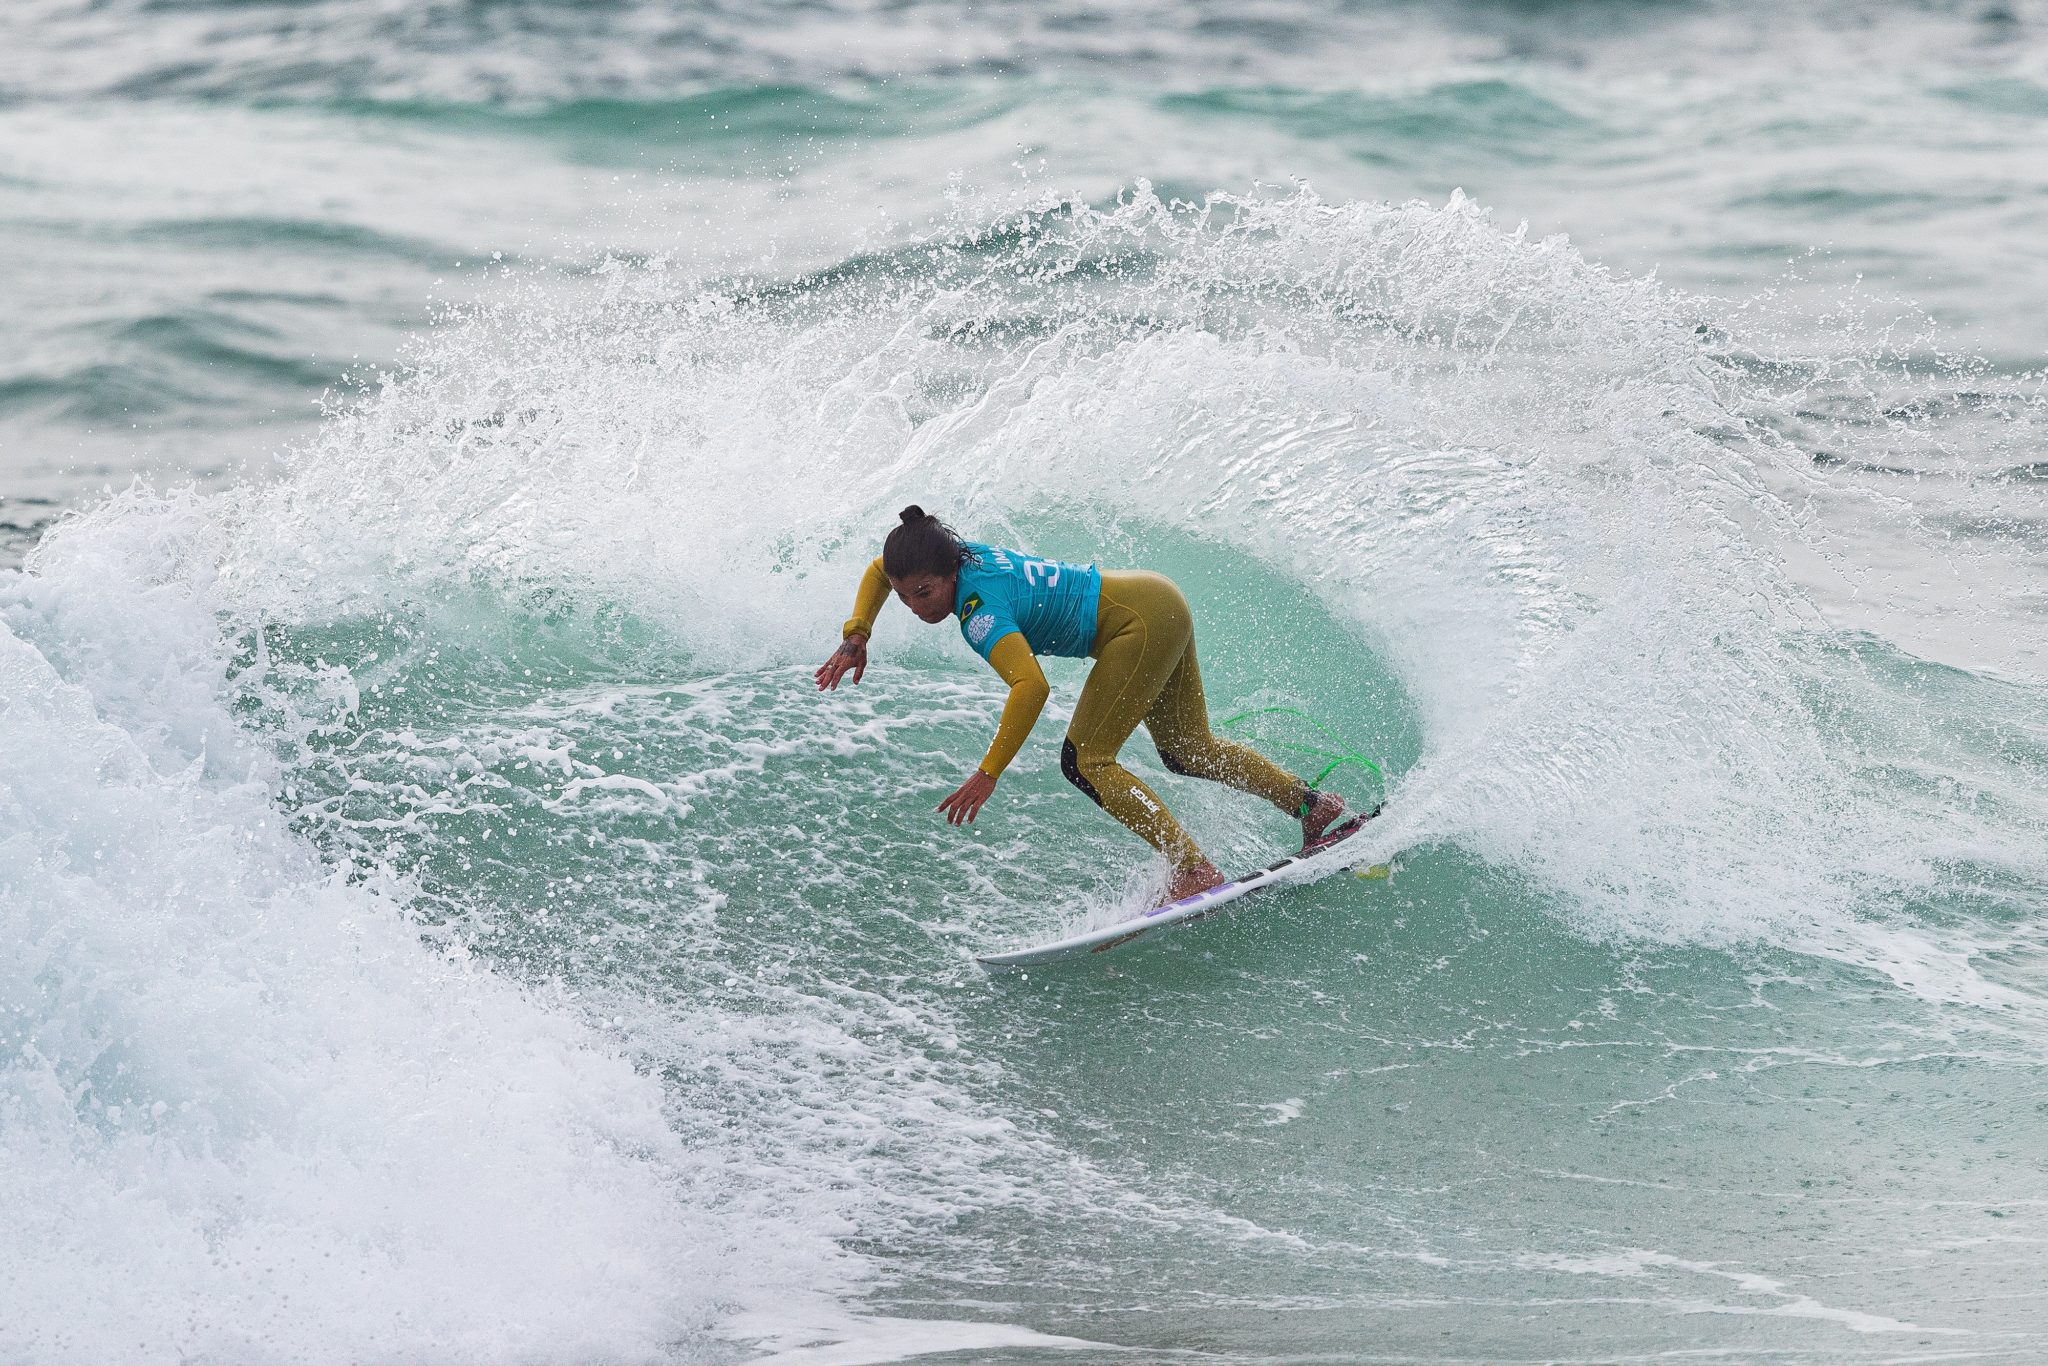 Silvana Lima-CE (Damien Poullenot / WSL via Getty Images)